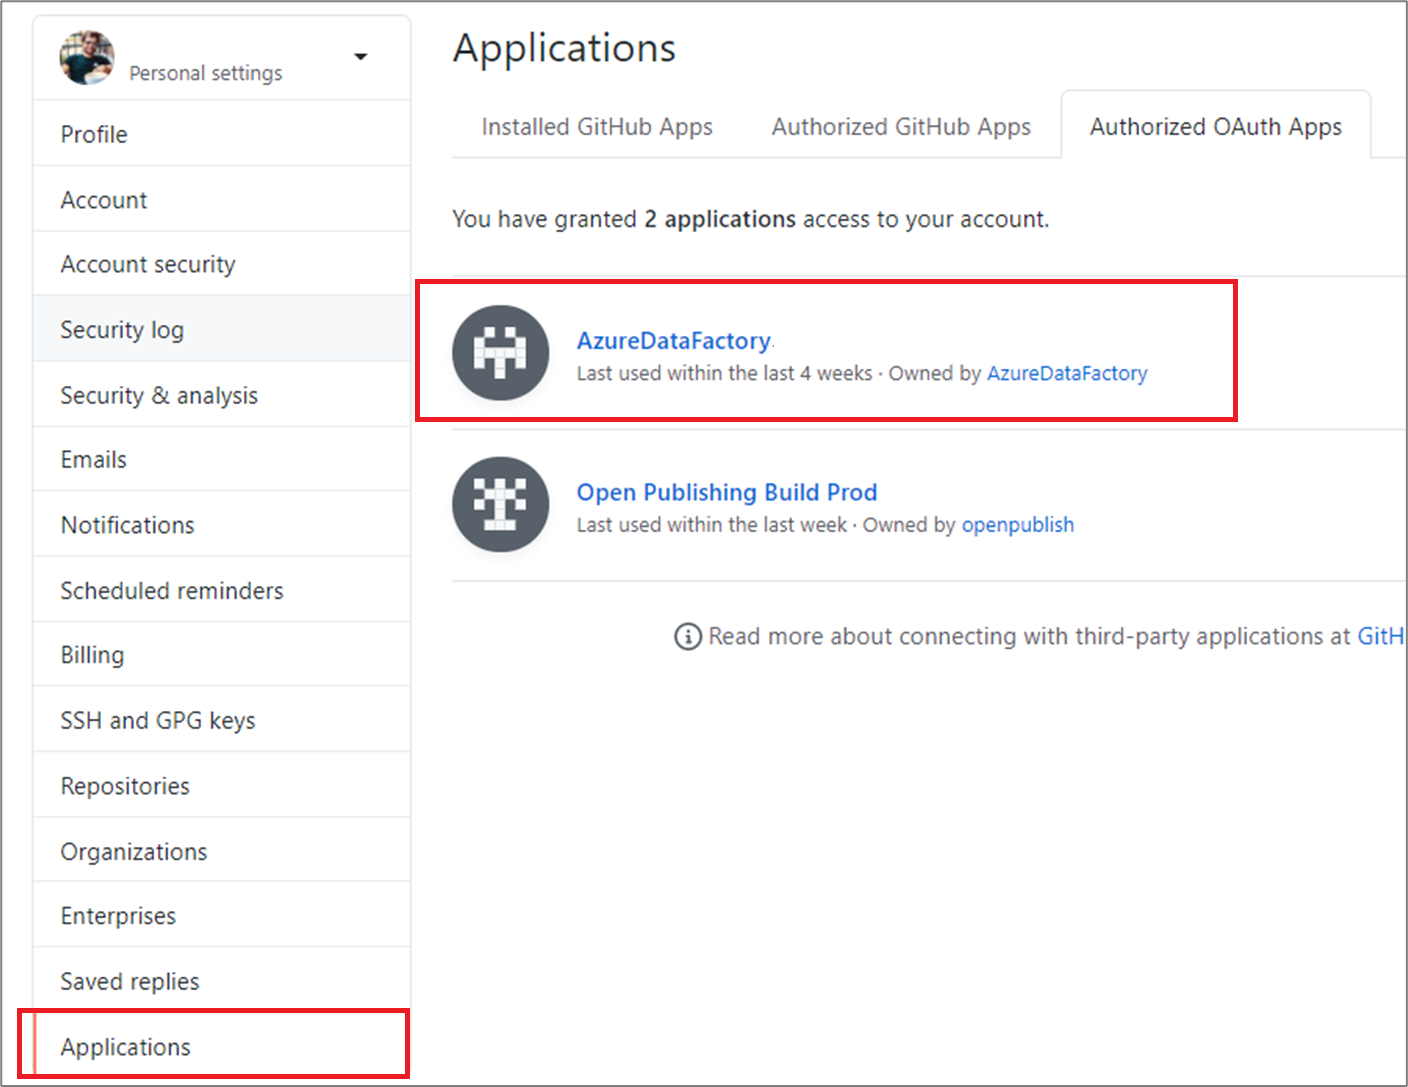 Select OAuth apps